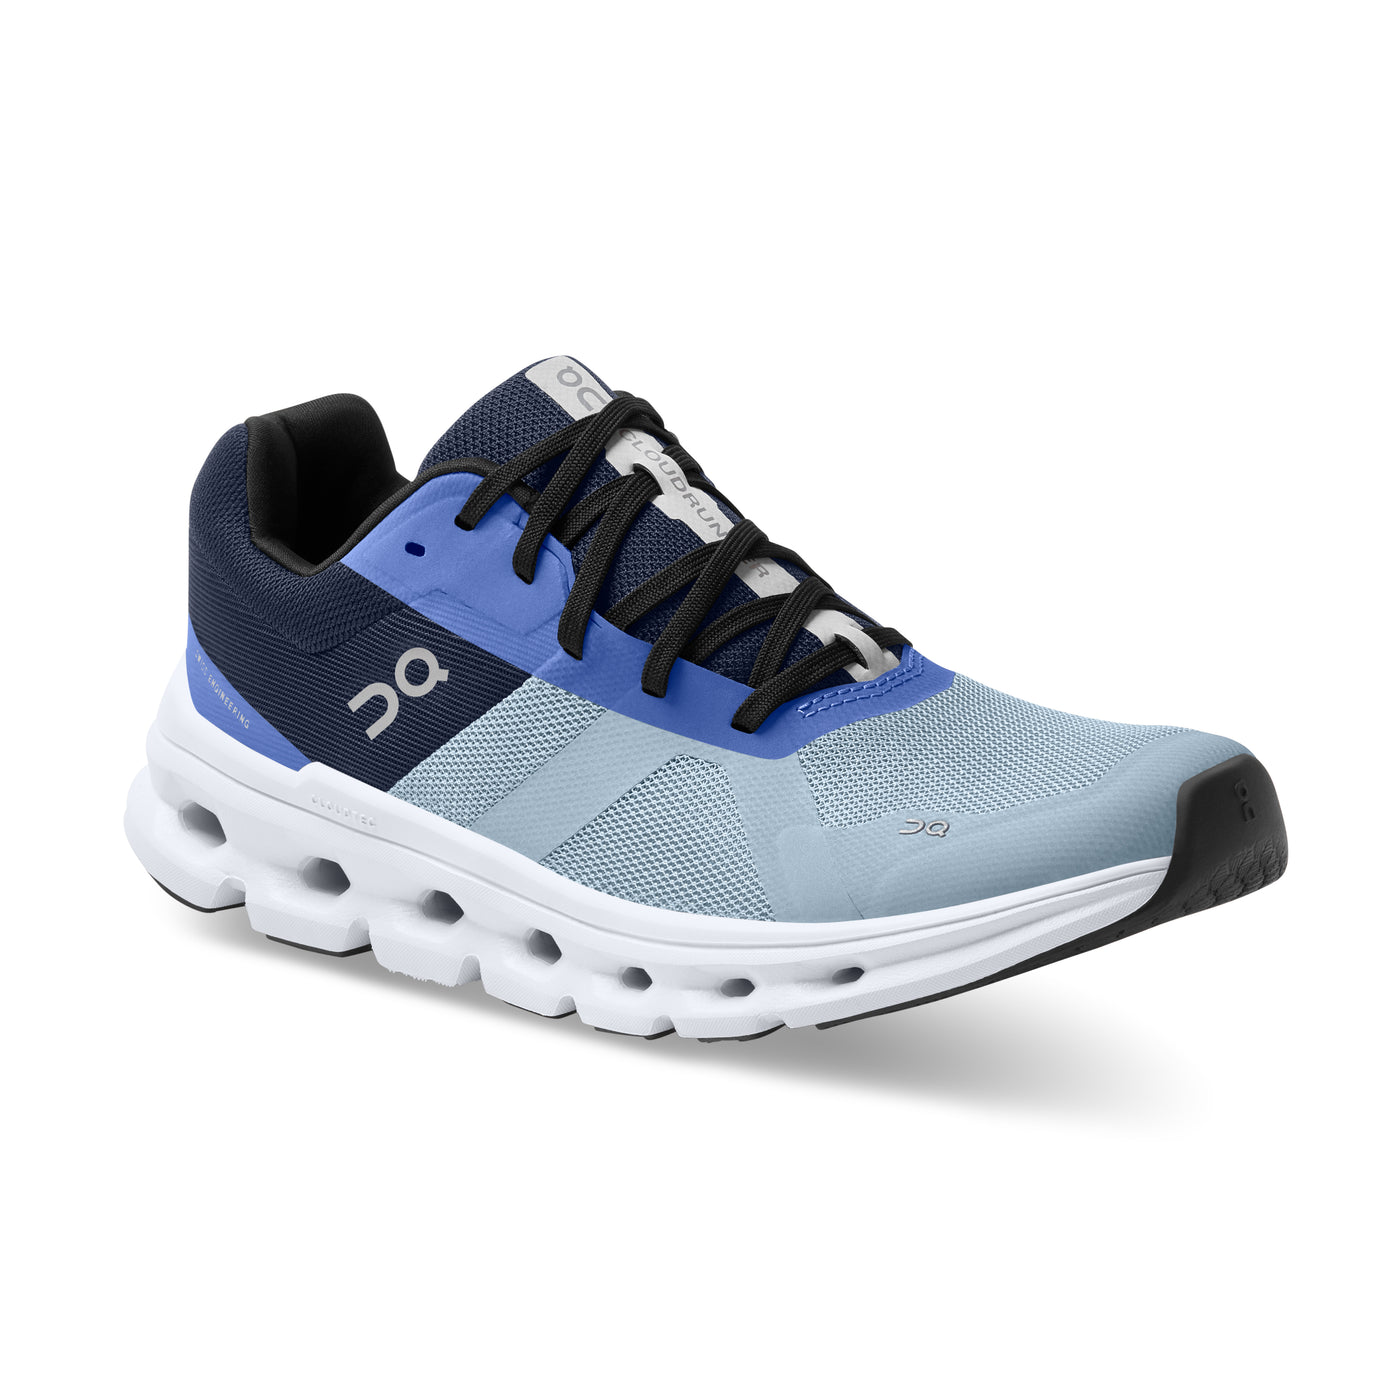 ON Womens Cloudrunner - Chambray/Midnight - Stability